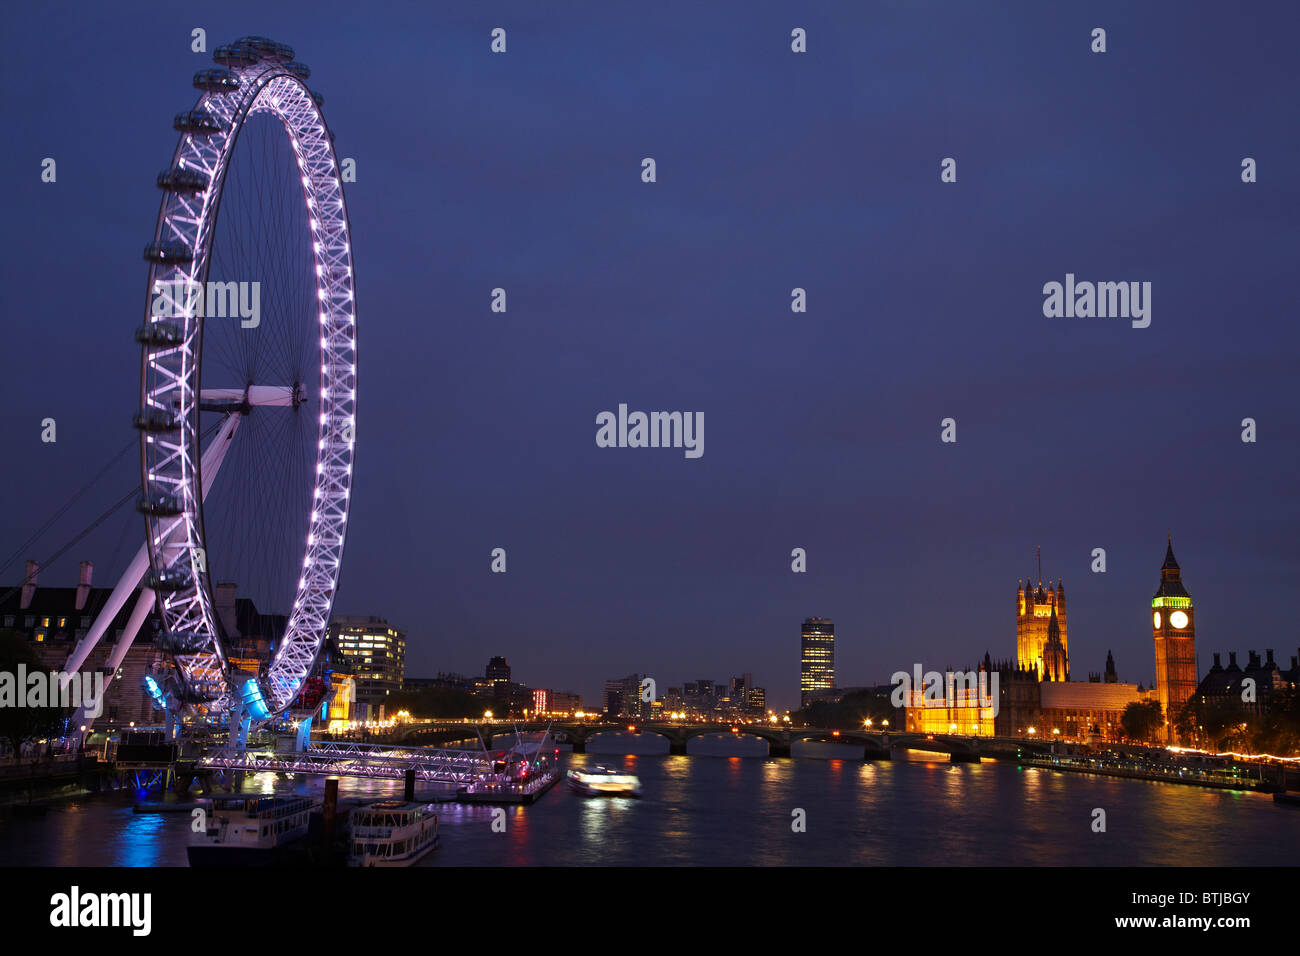 London Eye, Houses of Parliament, Big Ben, and River Thames, London, England, United Kingdom Stock Photo